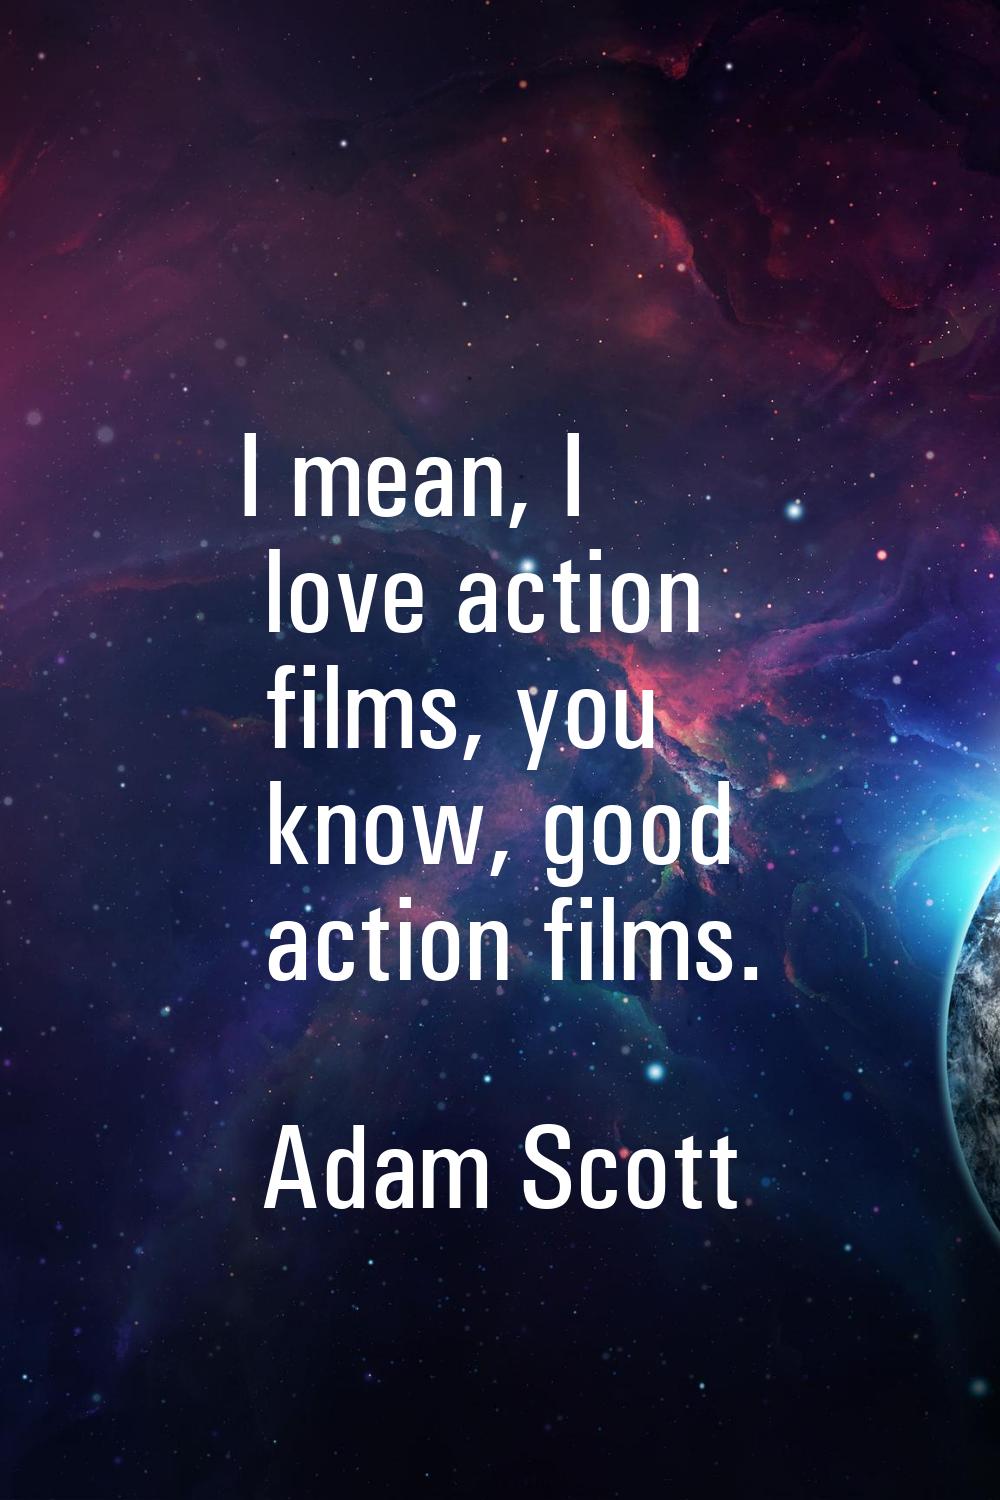 I mean, I love action films, you know, good action films.